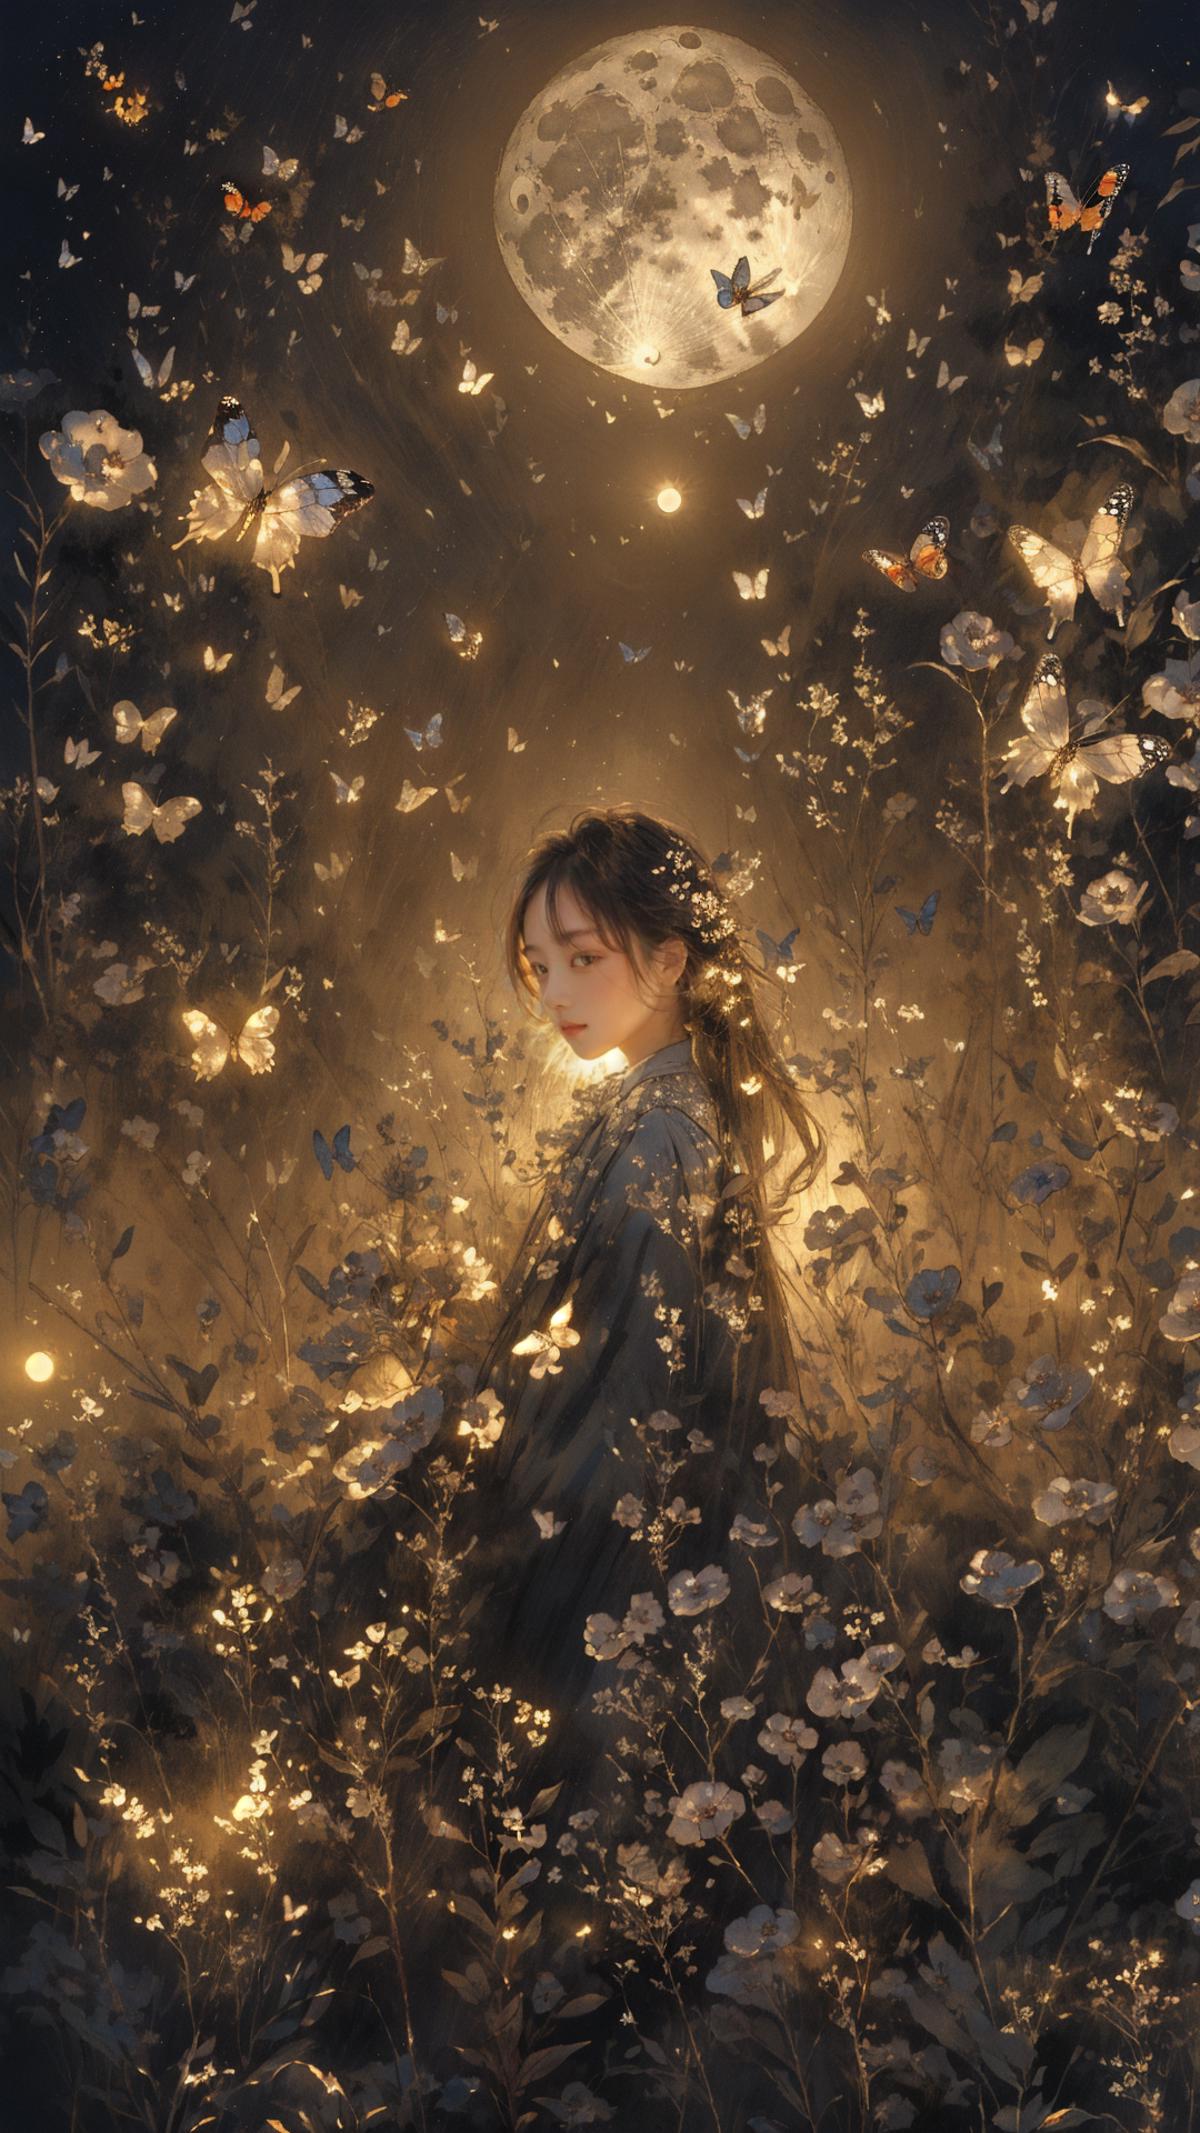 A young girl with flowers and butterflies all around her.